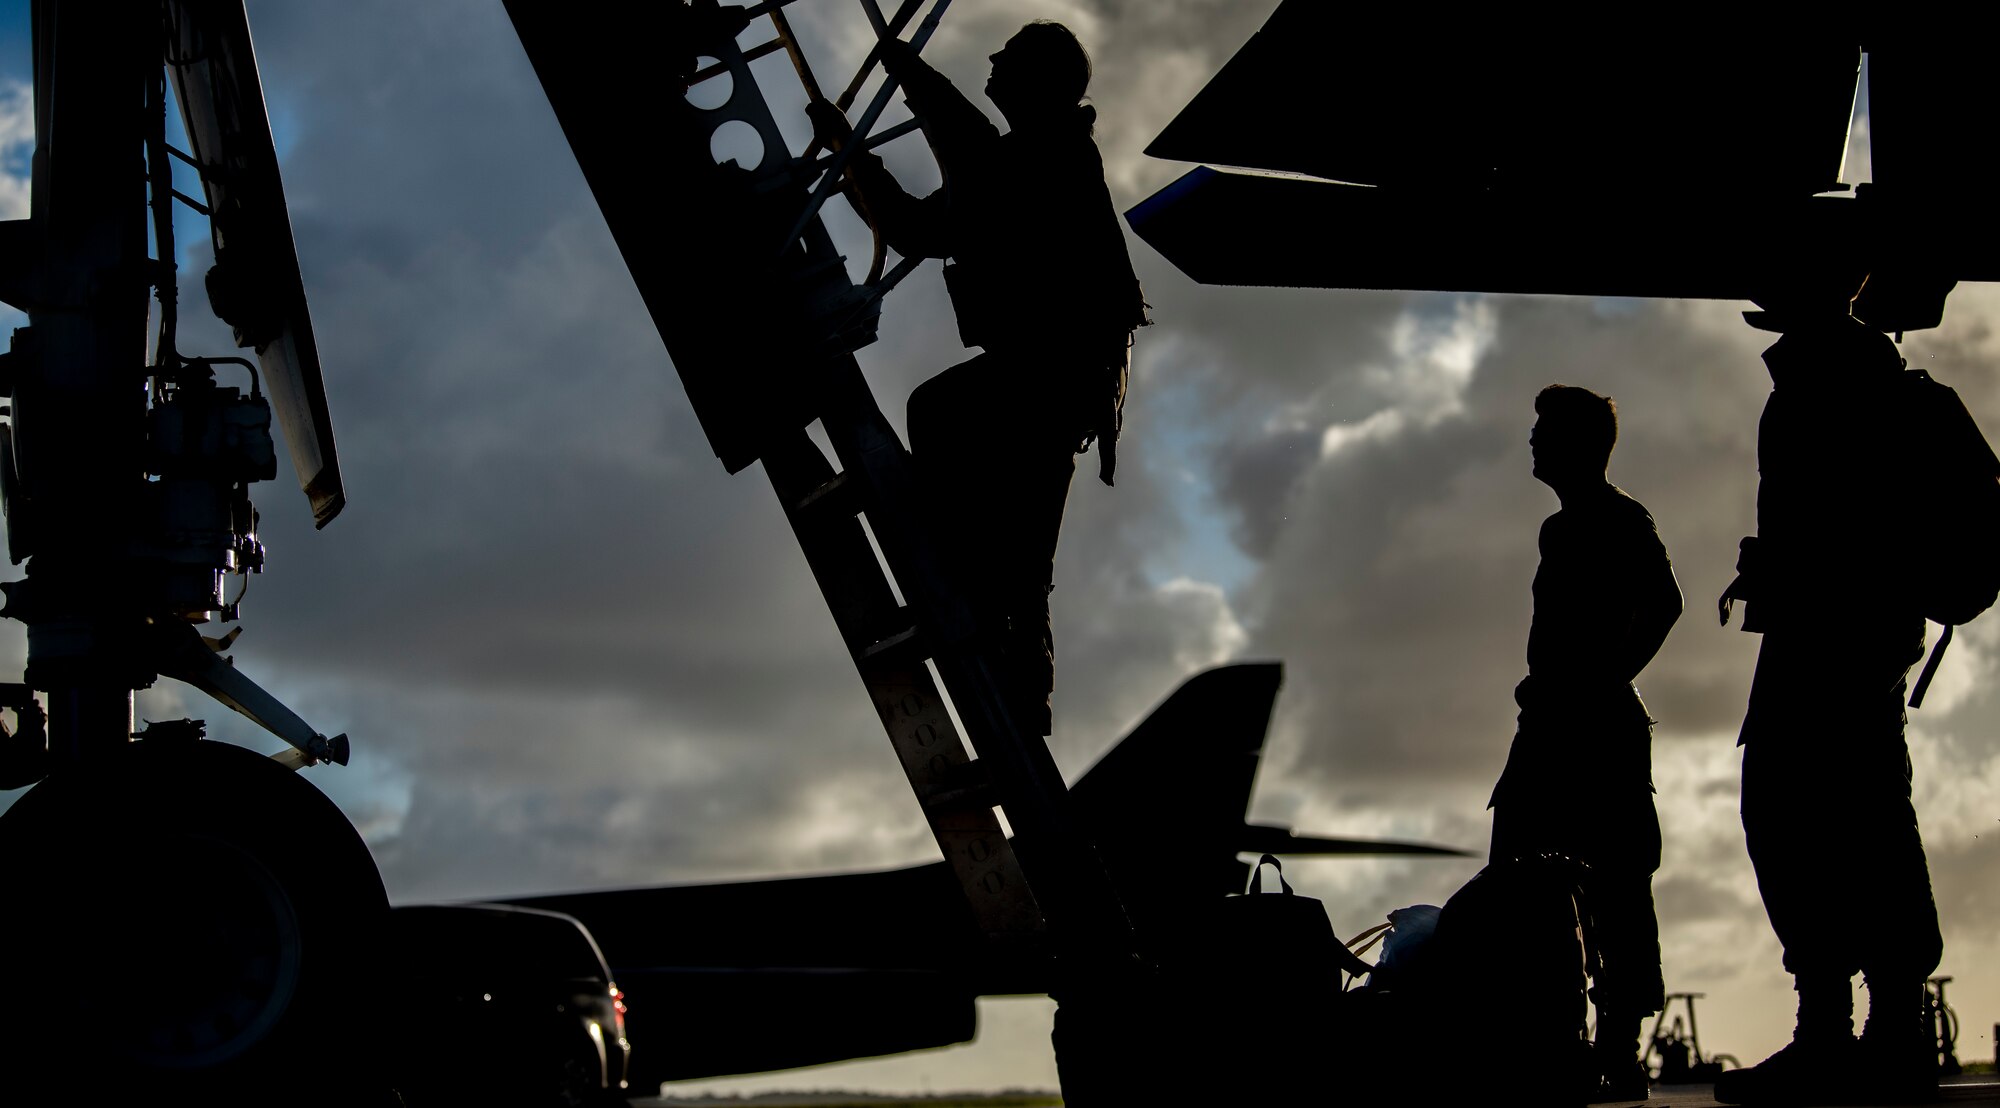 Capt. “HARM,” 9th Expeditionary Bomb Squadron B-1B Lancer weapons system officer instructor, climbs out of a B-1B at Andersen Air Force Base, Guam, May 22, 2020. This B-1B aircrew completed a 24-hour mission that included a large force exercise. The 9th EBS is deployed to Andersen Air Force Base, Guam, as part of a Bomber Task Force supporting Pacific Air Forces’ strategic deterrence missions and  commitment to the security and stability of the Indo-Pacific region.(U.S. Air Force photo by Senior Airman River Bruce)